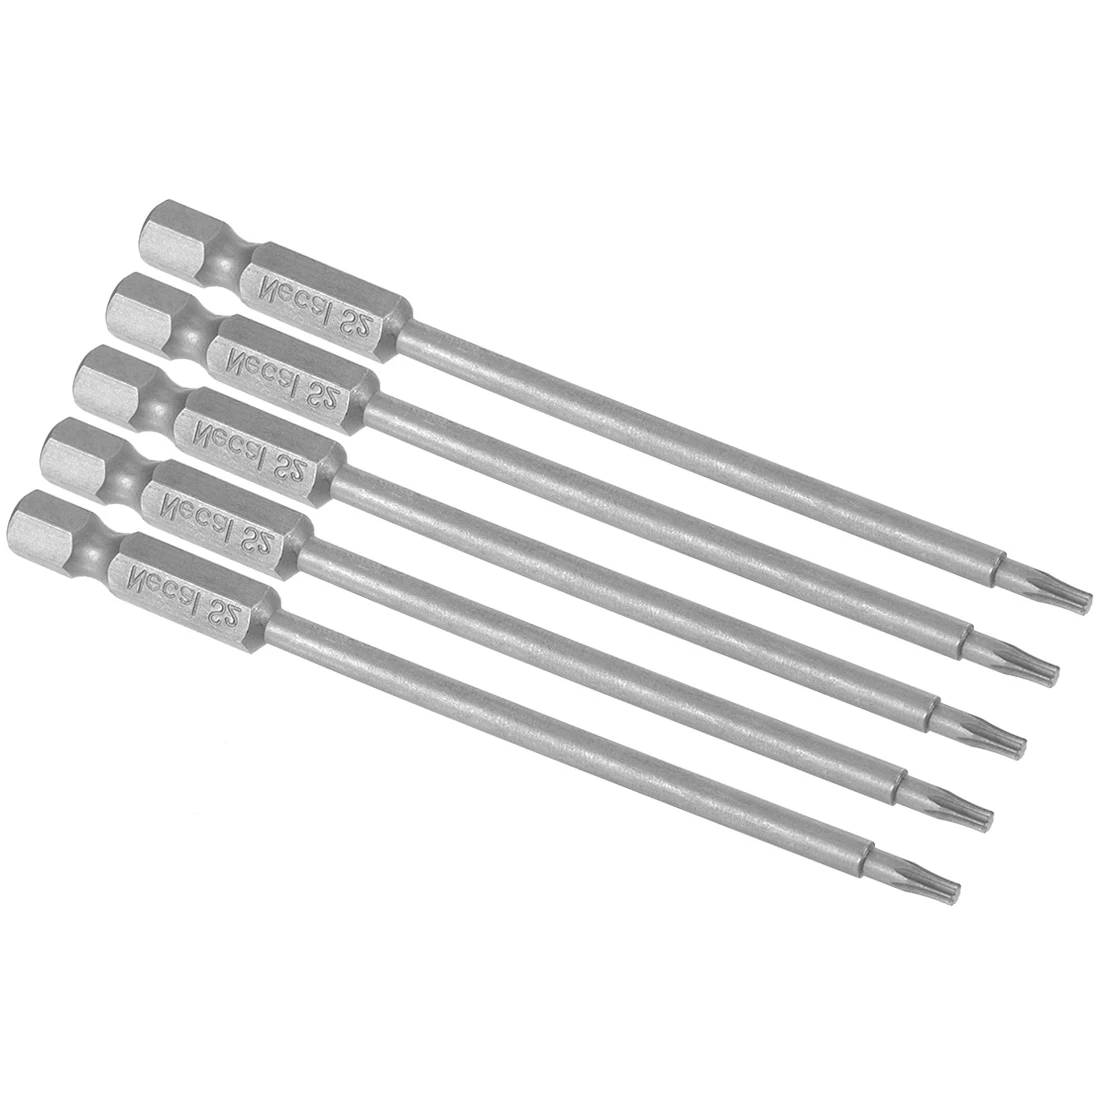 

uxcell 5PCS Torx Screwdriver Bits 1/4-Inch Hex Shank 100mm Length T9 Magnetic Security Star Screw Driver S2 Bit